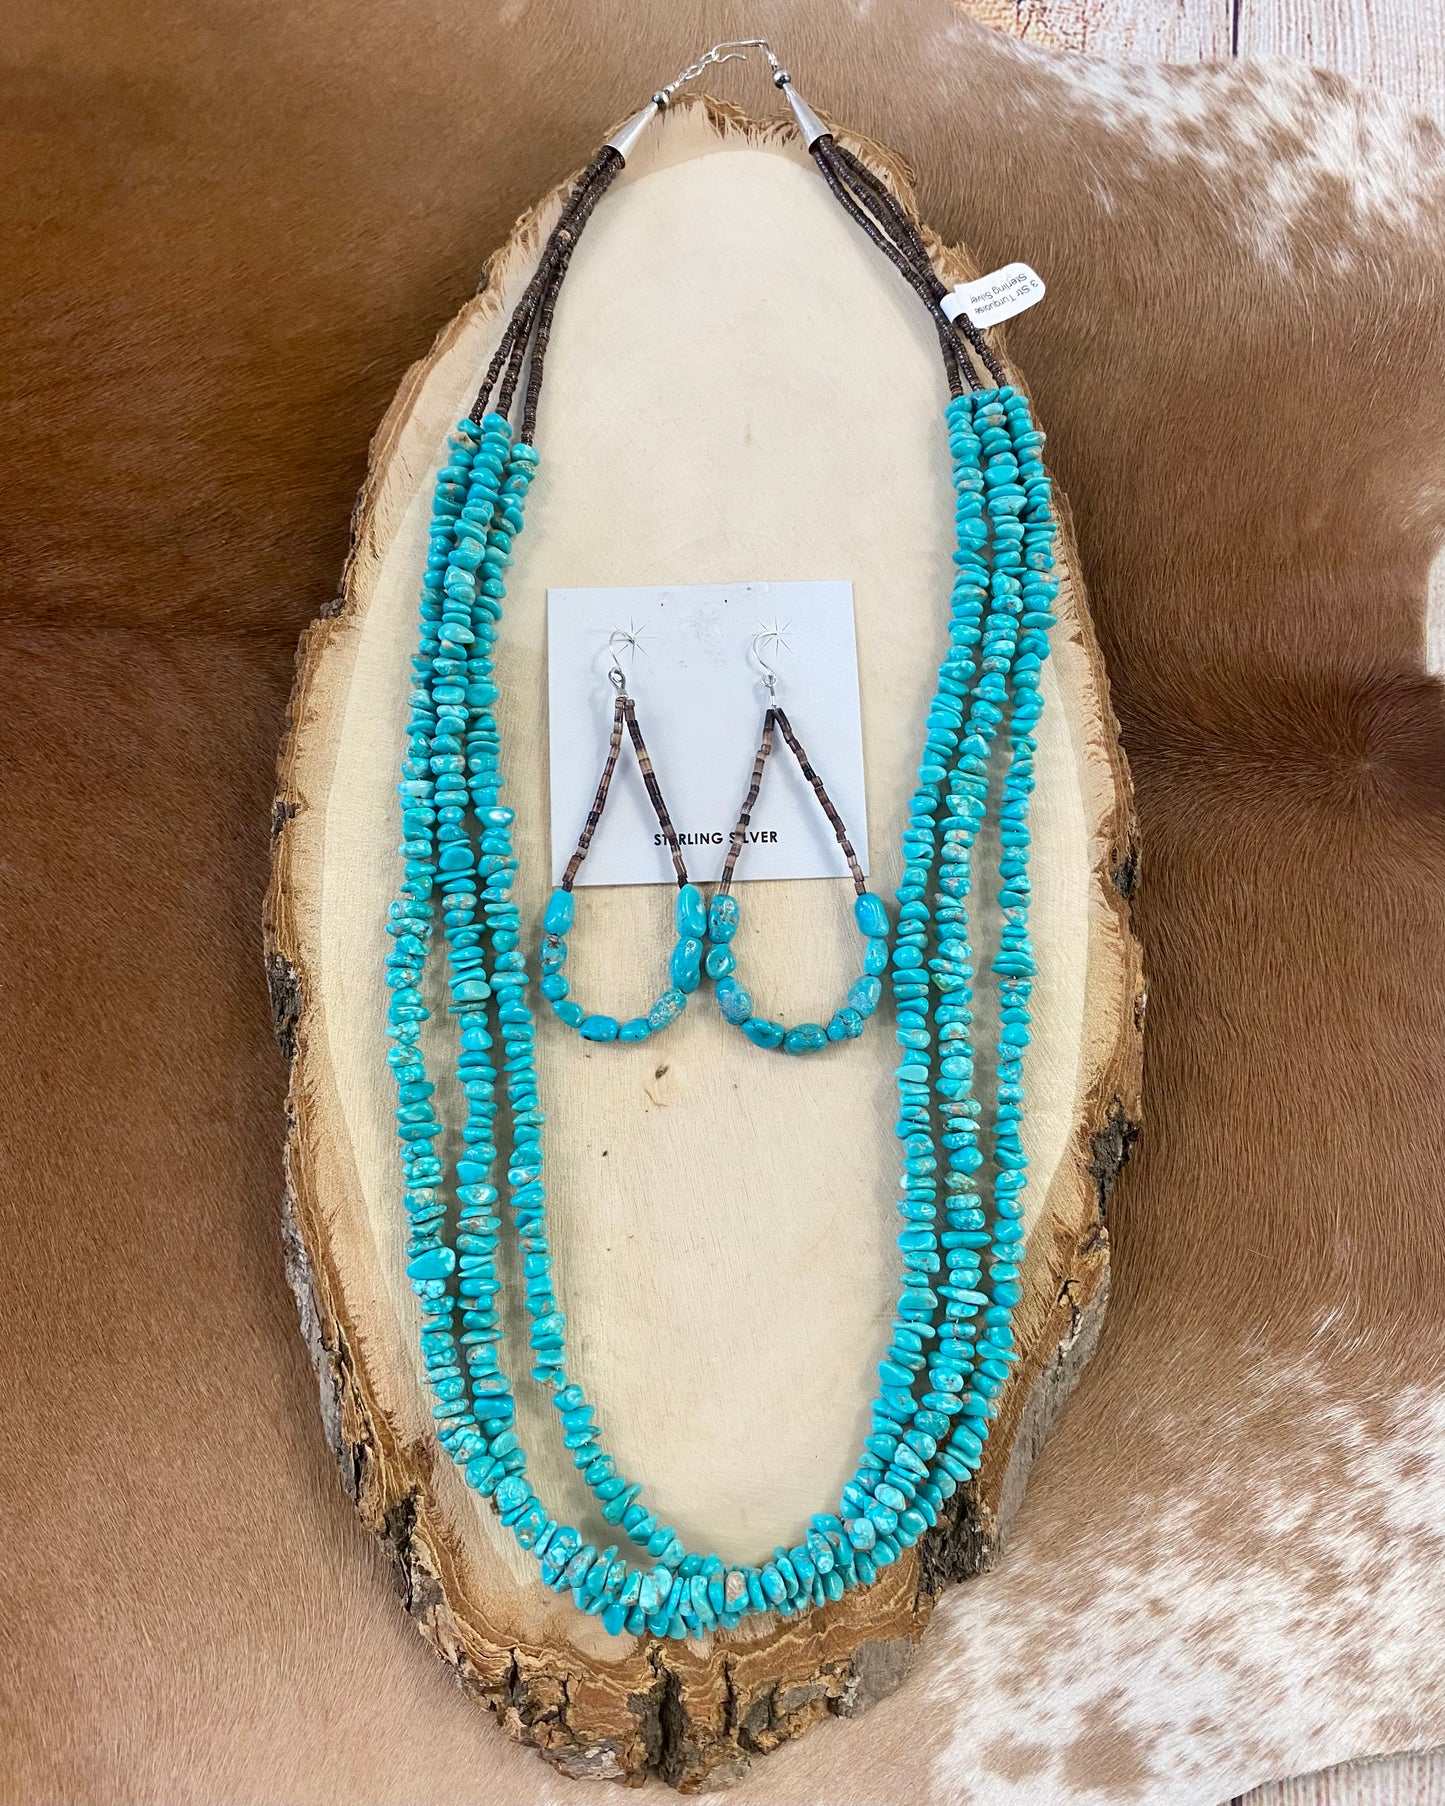 This handmade 25” inches long length necklace is an absolute beauty. A stunning three-strand turquoise beaded necklace with brown heishi beads. Layer it or wear it alone or add a pendant to keep your look totally unique. The perfect dainty layering piece! Simple, yet striking!   Size: 25” Inches Length   Stone: Turquoise 